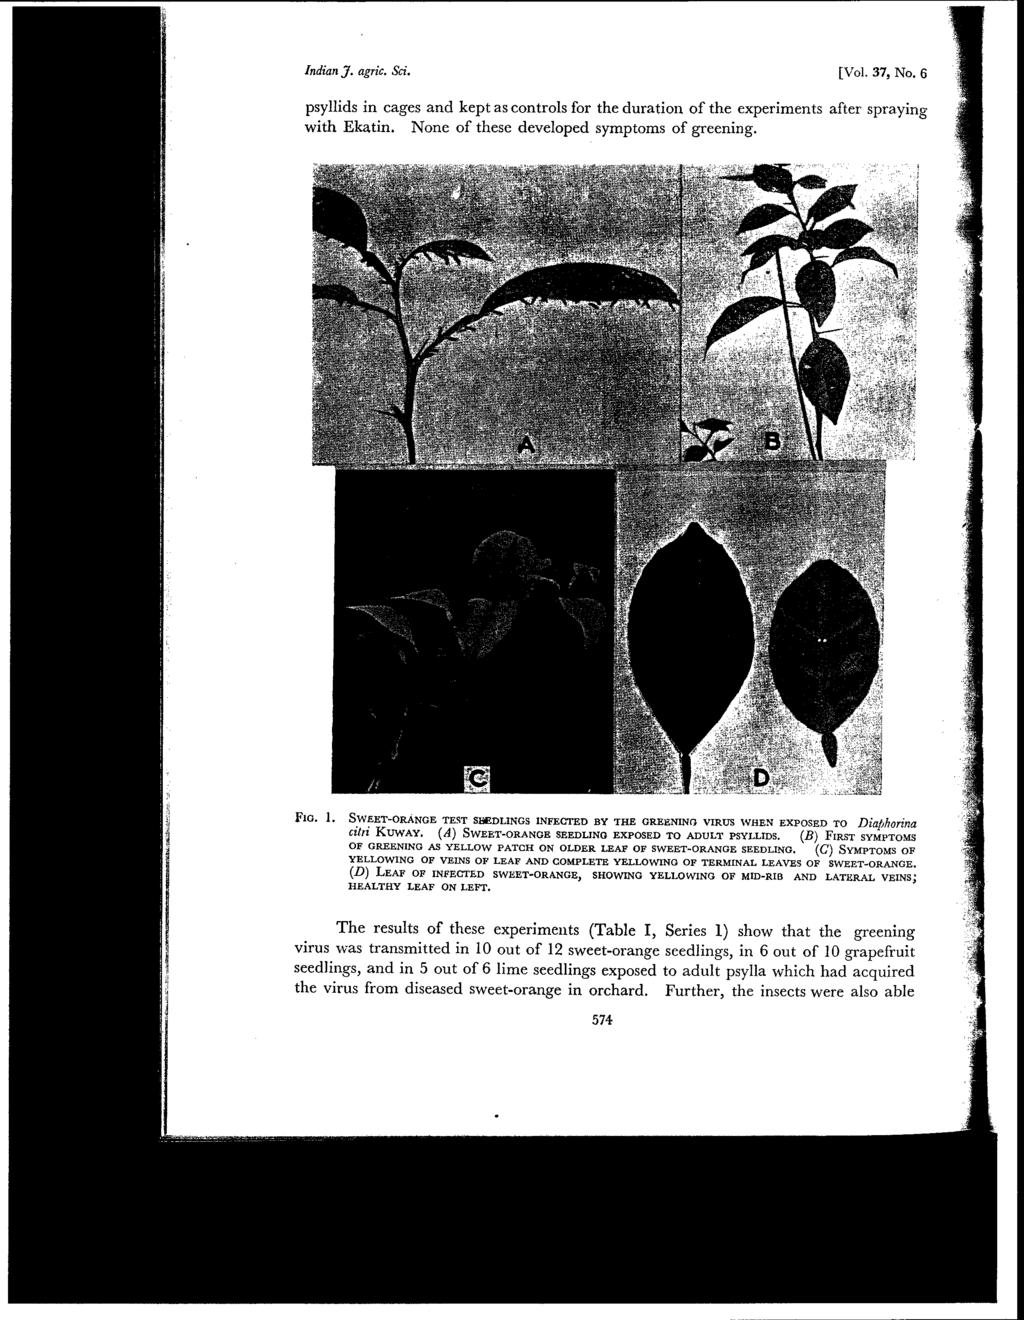 Indian J. agtic. Sci. [Vol. 37, No.6 psyllids in cages and kept as controls for the duration of the experiments after spraying with Ekatin. None of these developed symptoms of greening. FIG. 1.